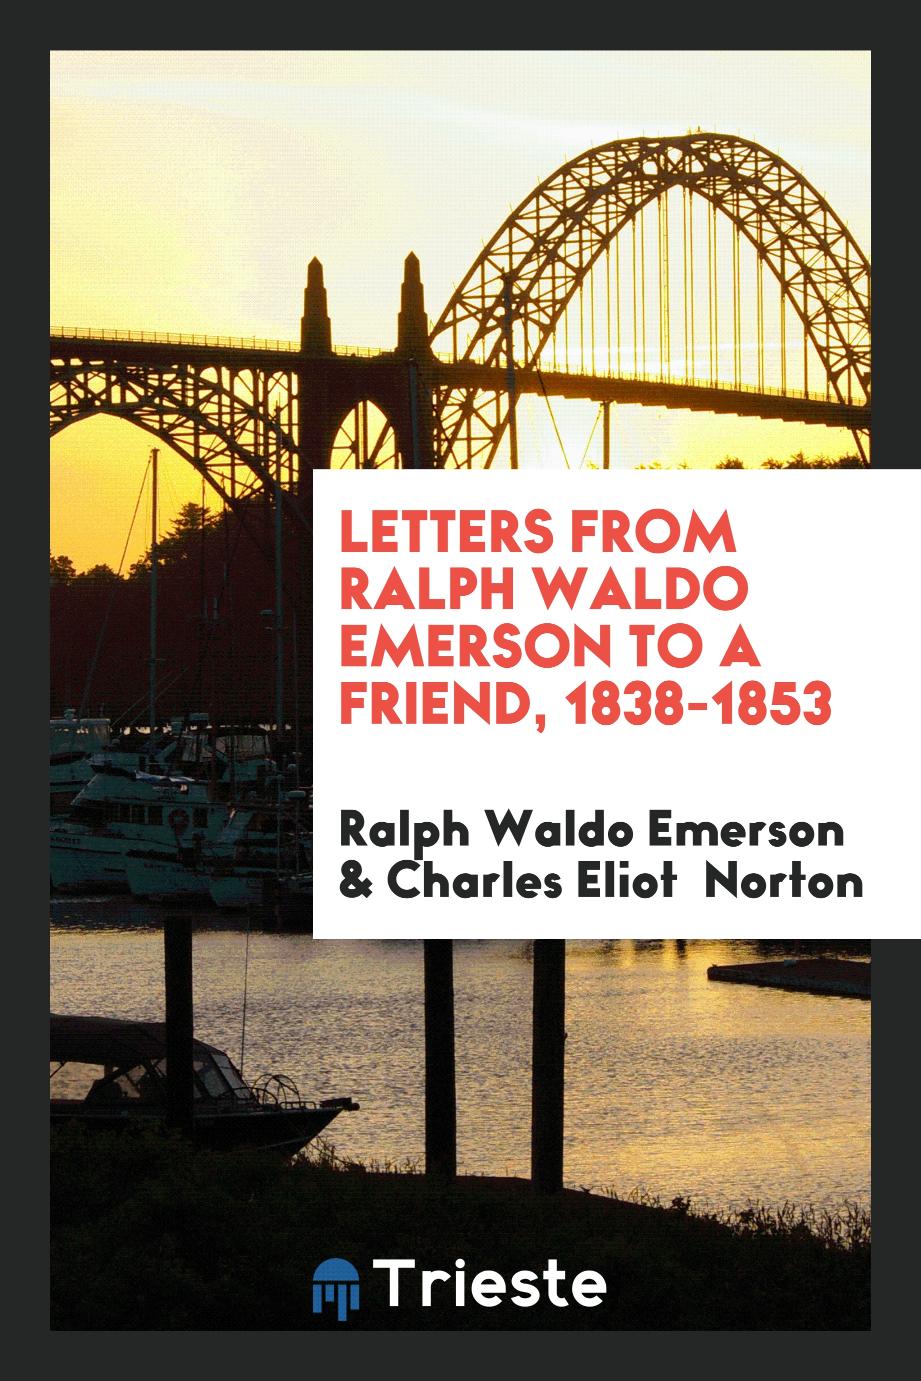 Letters from Ralph Waldo Emerson to a Friend, 1838-1853